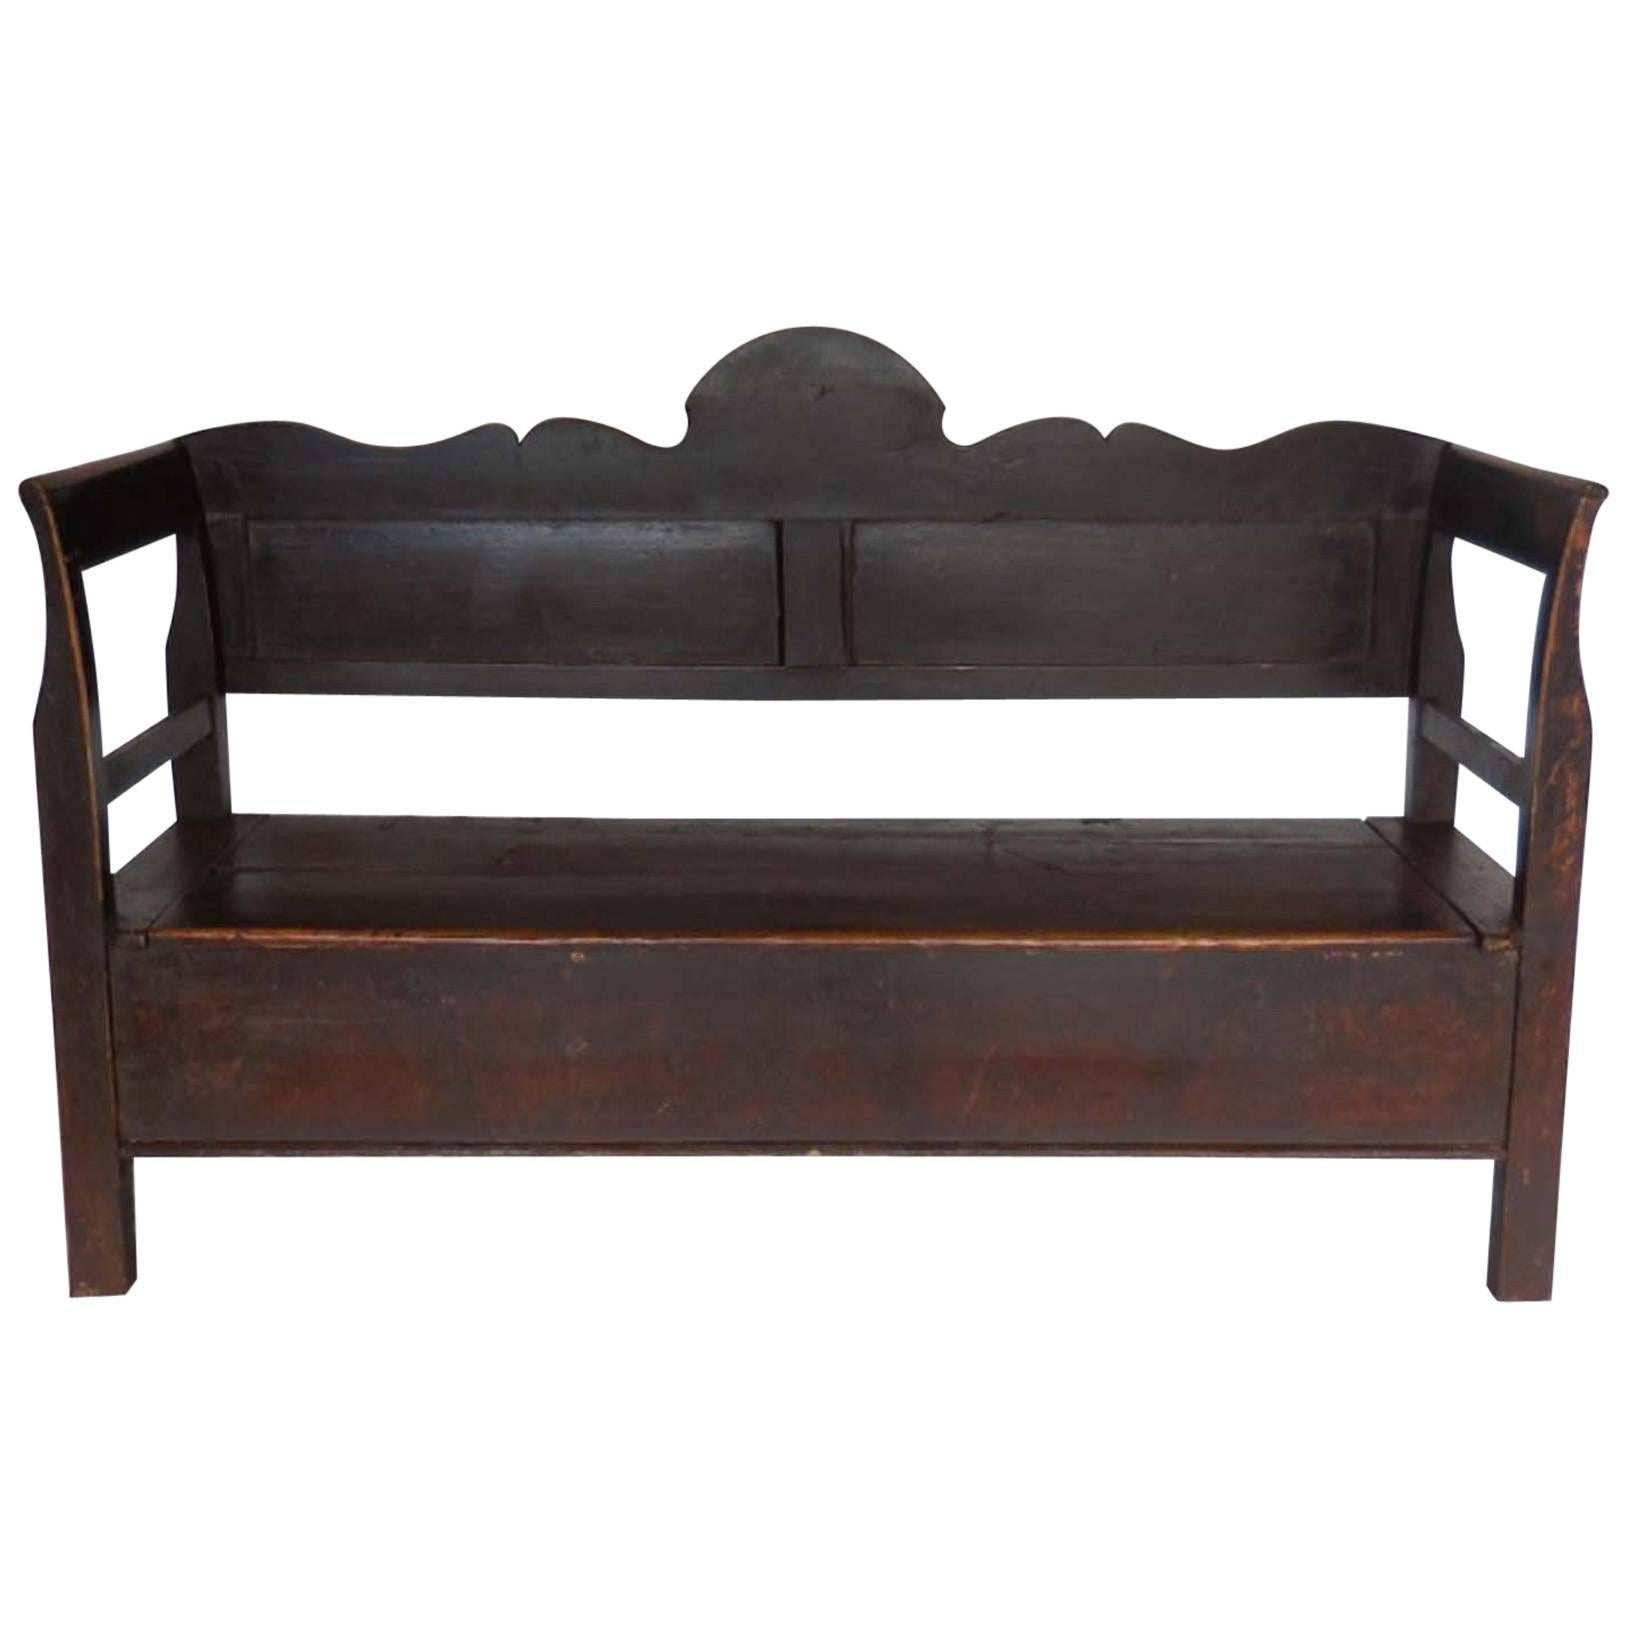 19th Century Northern European Bench with Lift Top Seat Storage